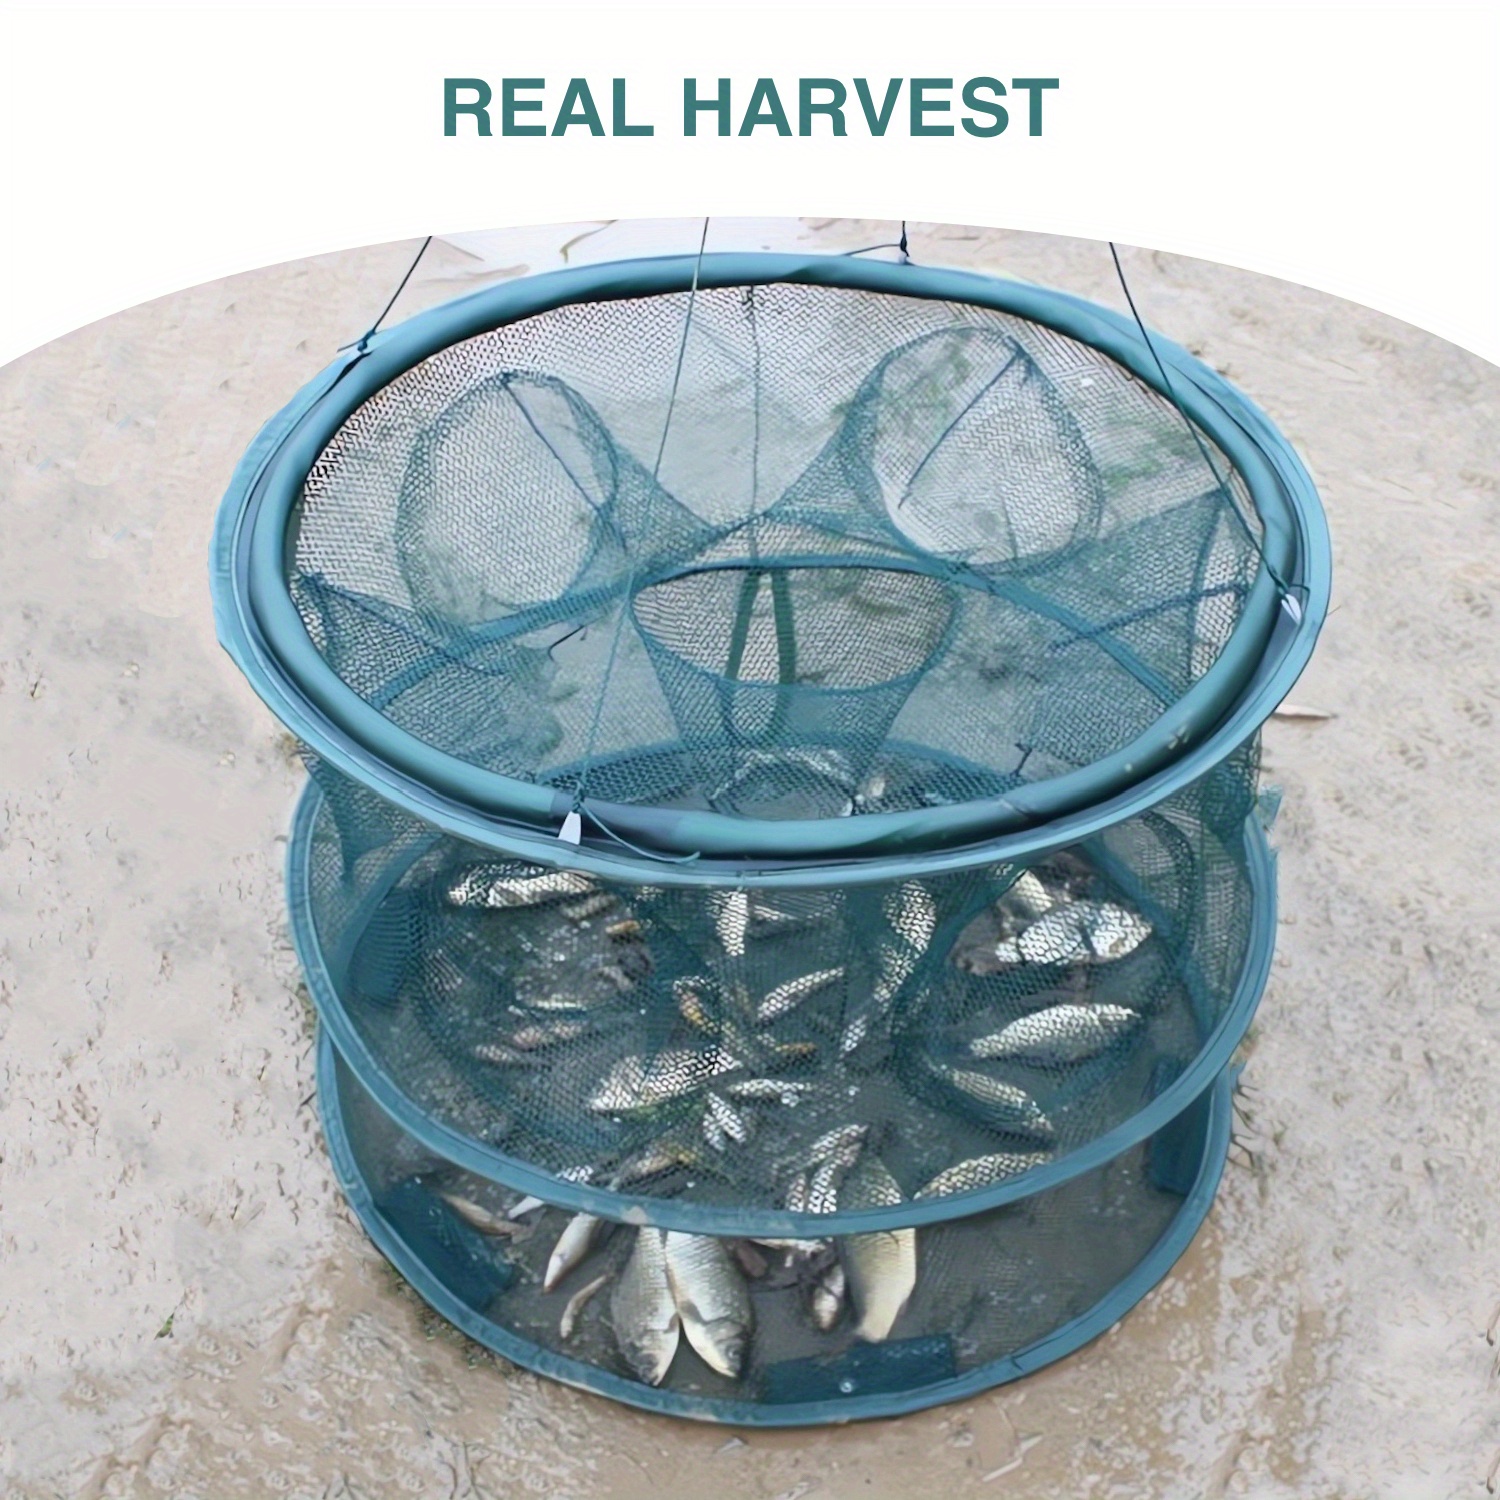 Fishing Bait Trap Crab Trap Minnow Trap Crawfish Trap Lobster Shrimp  Collapsible Cast Net Collapsible Outdoor Cast Cage Portable - AliExpress